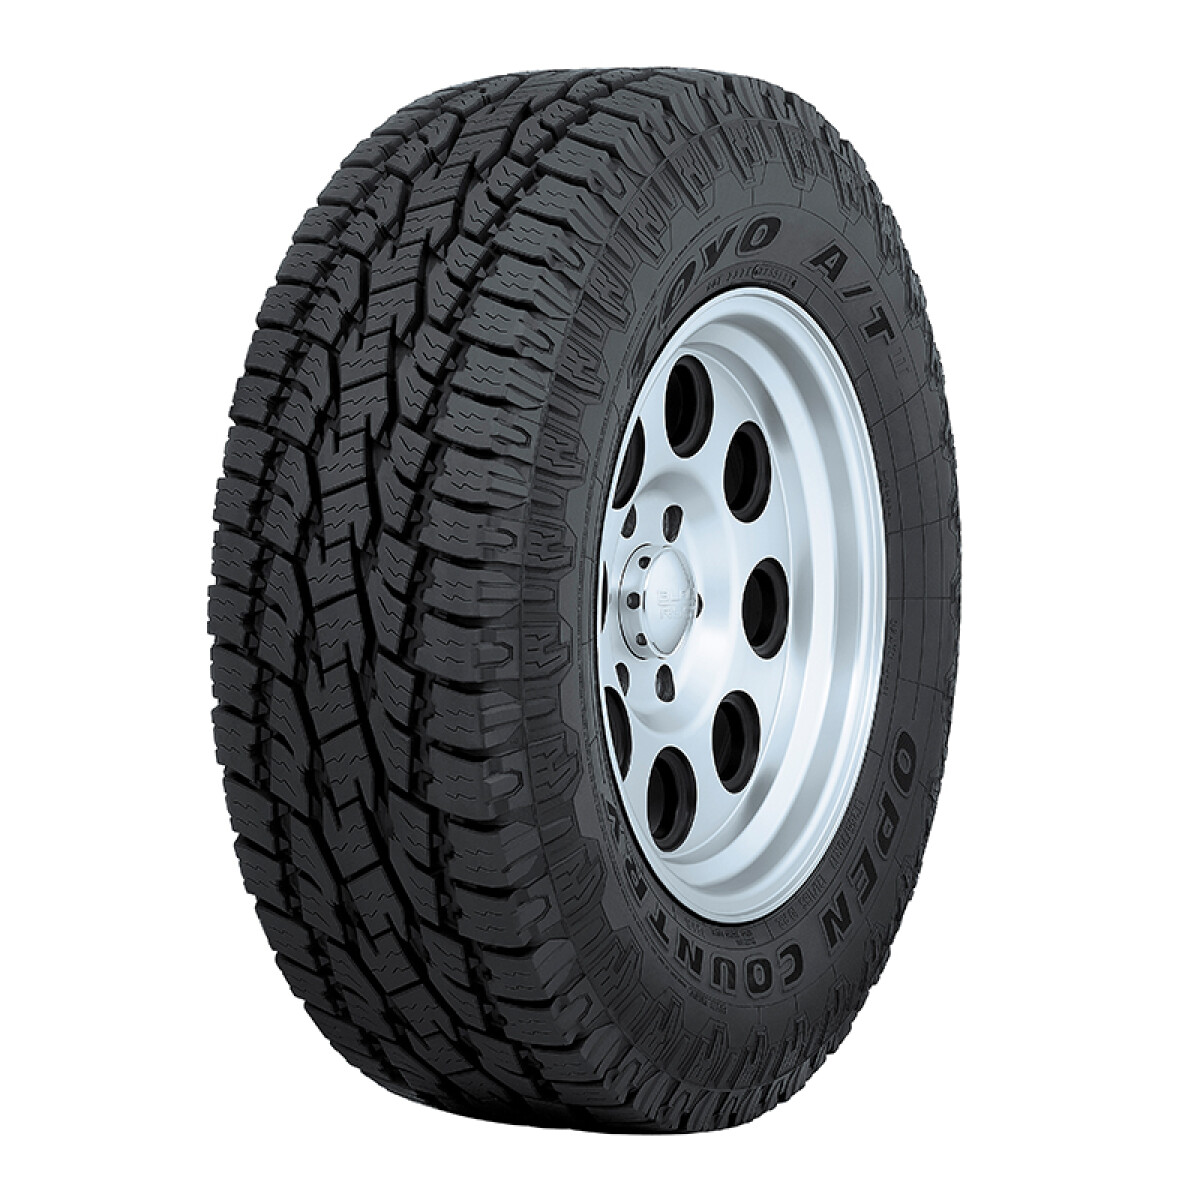 CUBIERTA NEUMATICO TOYO OPEN COUNTRY AT2 LT245/70R16 118R 